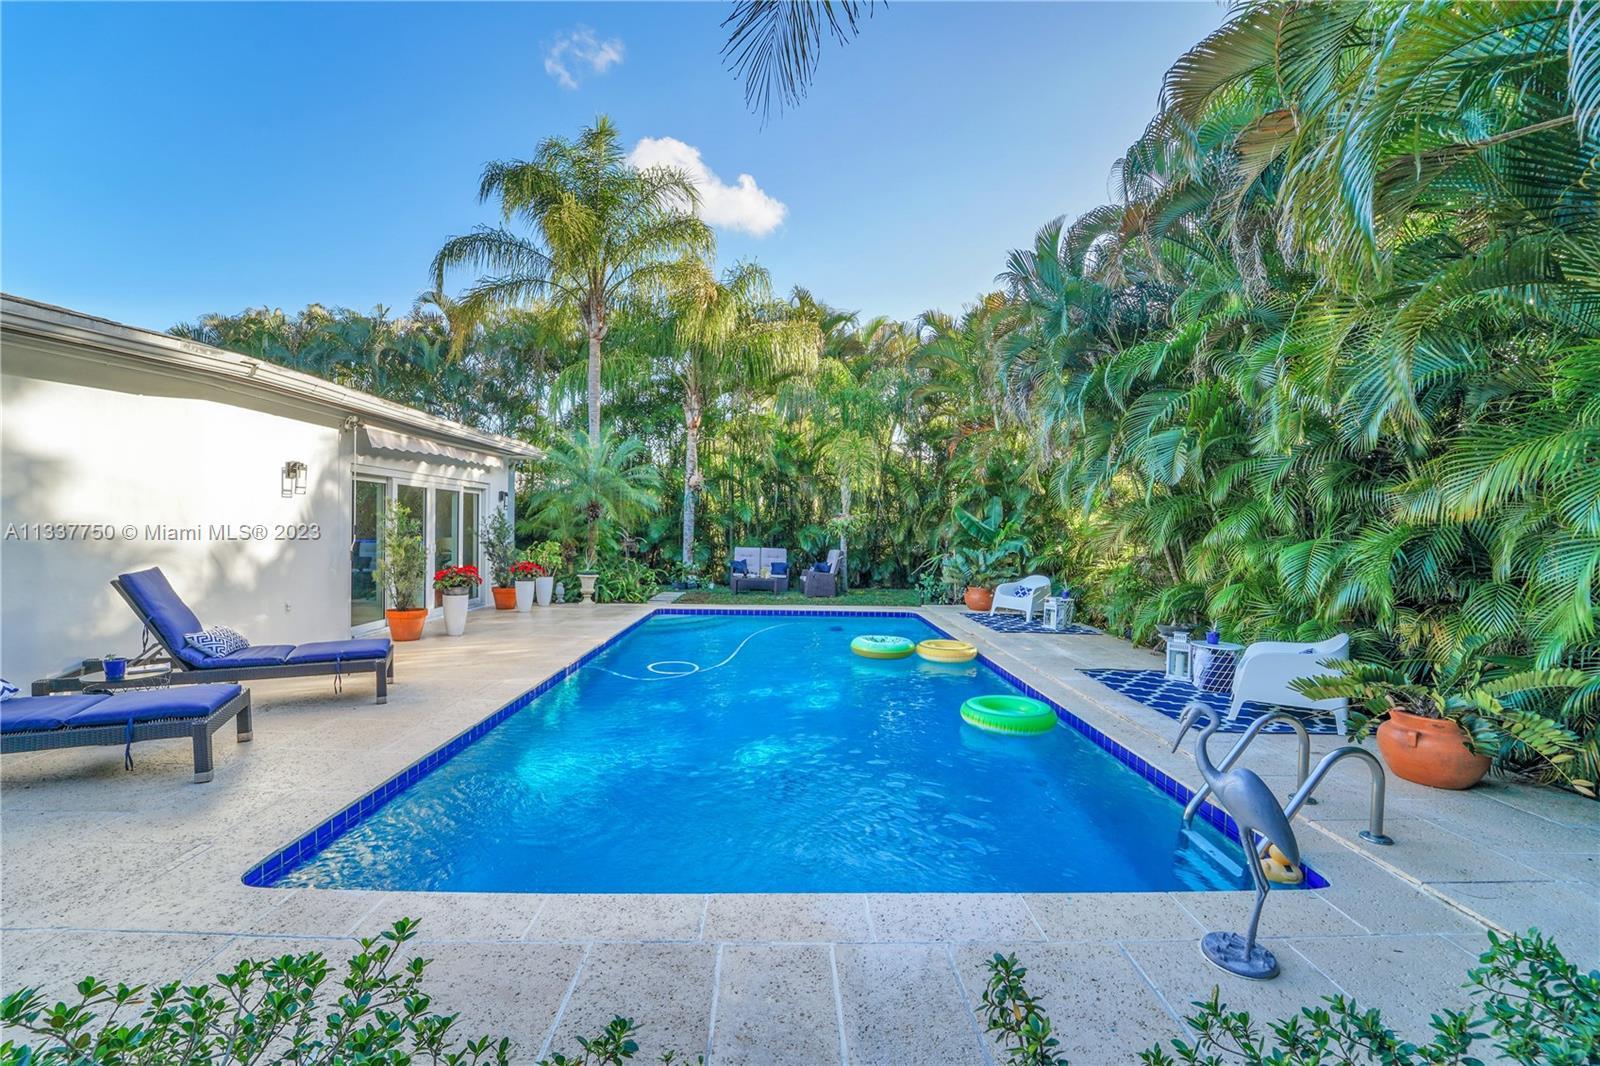 This is It! Bring your green thumb to this tropical oasis and live in your own paradise! This Open f